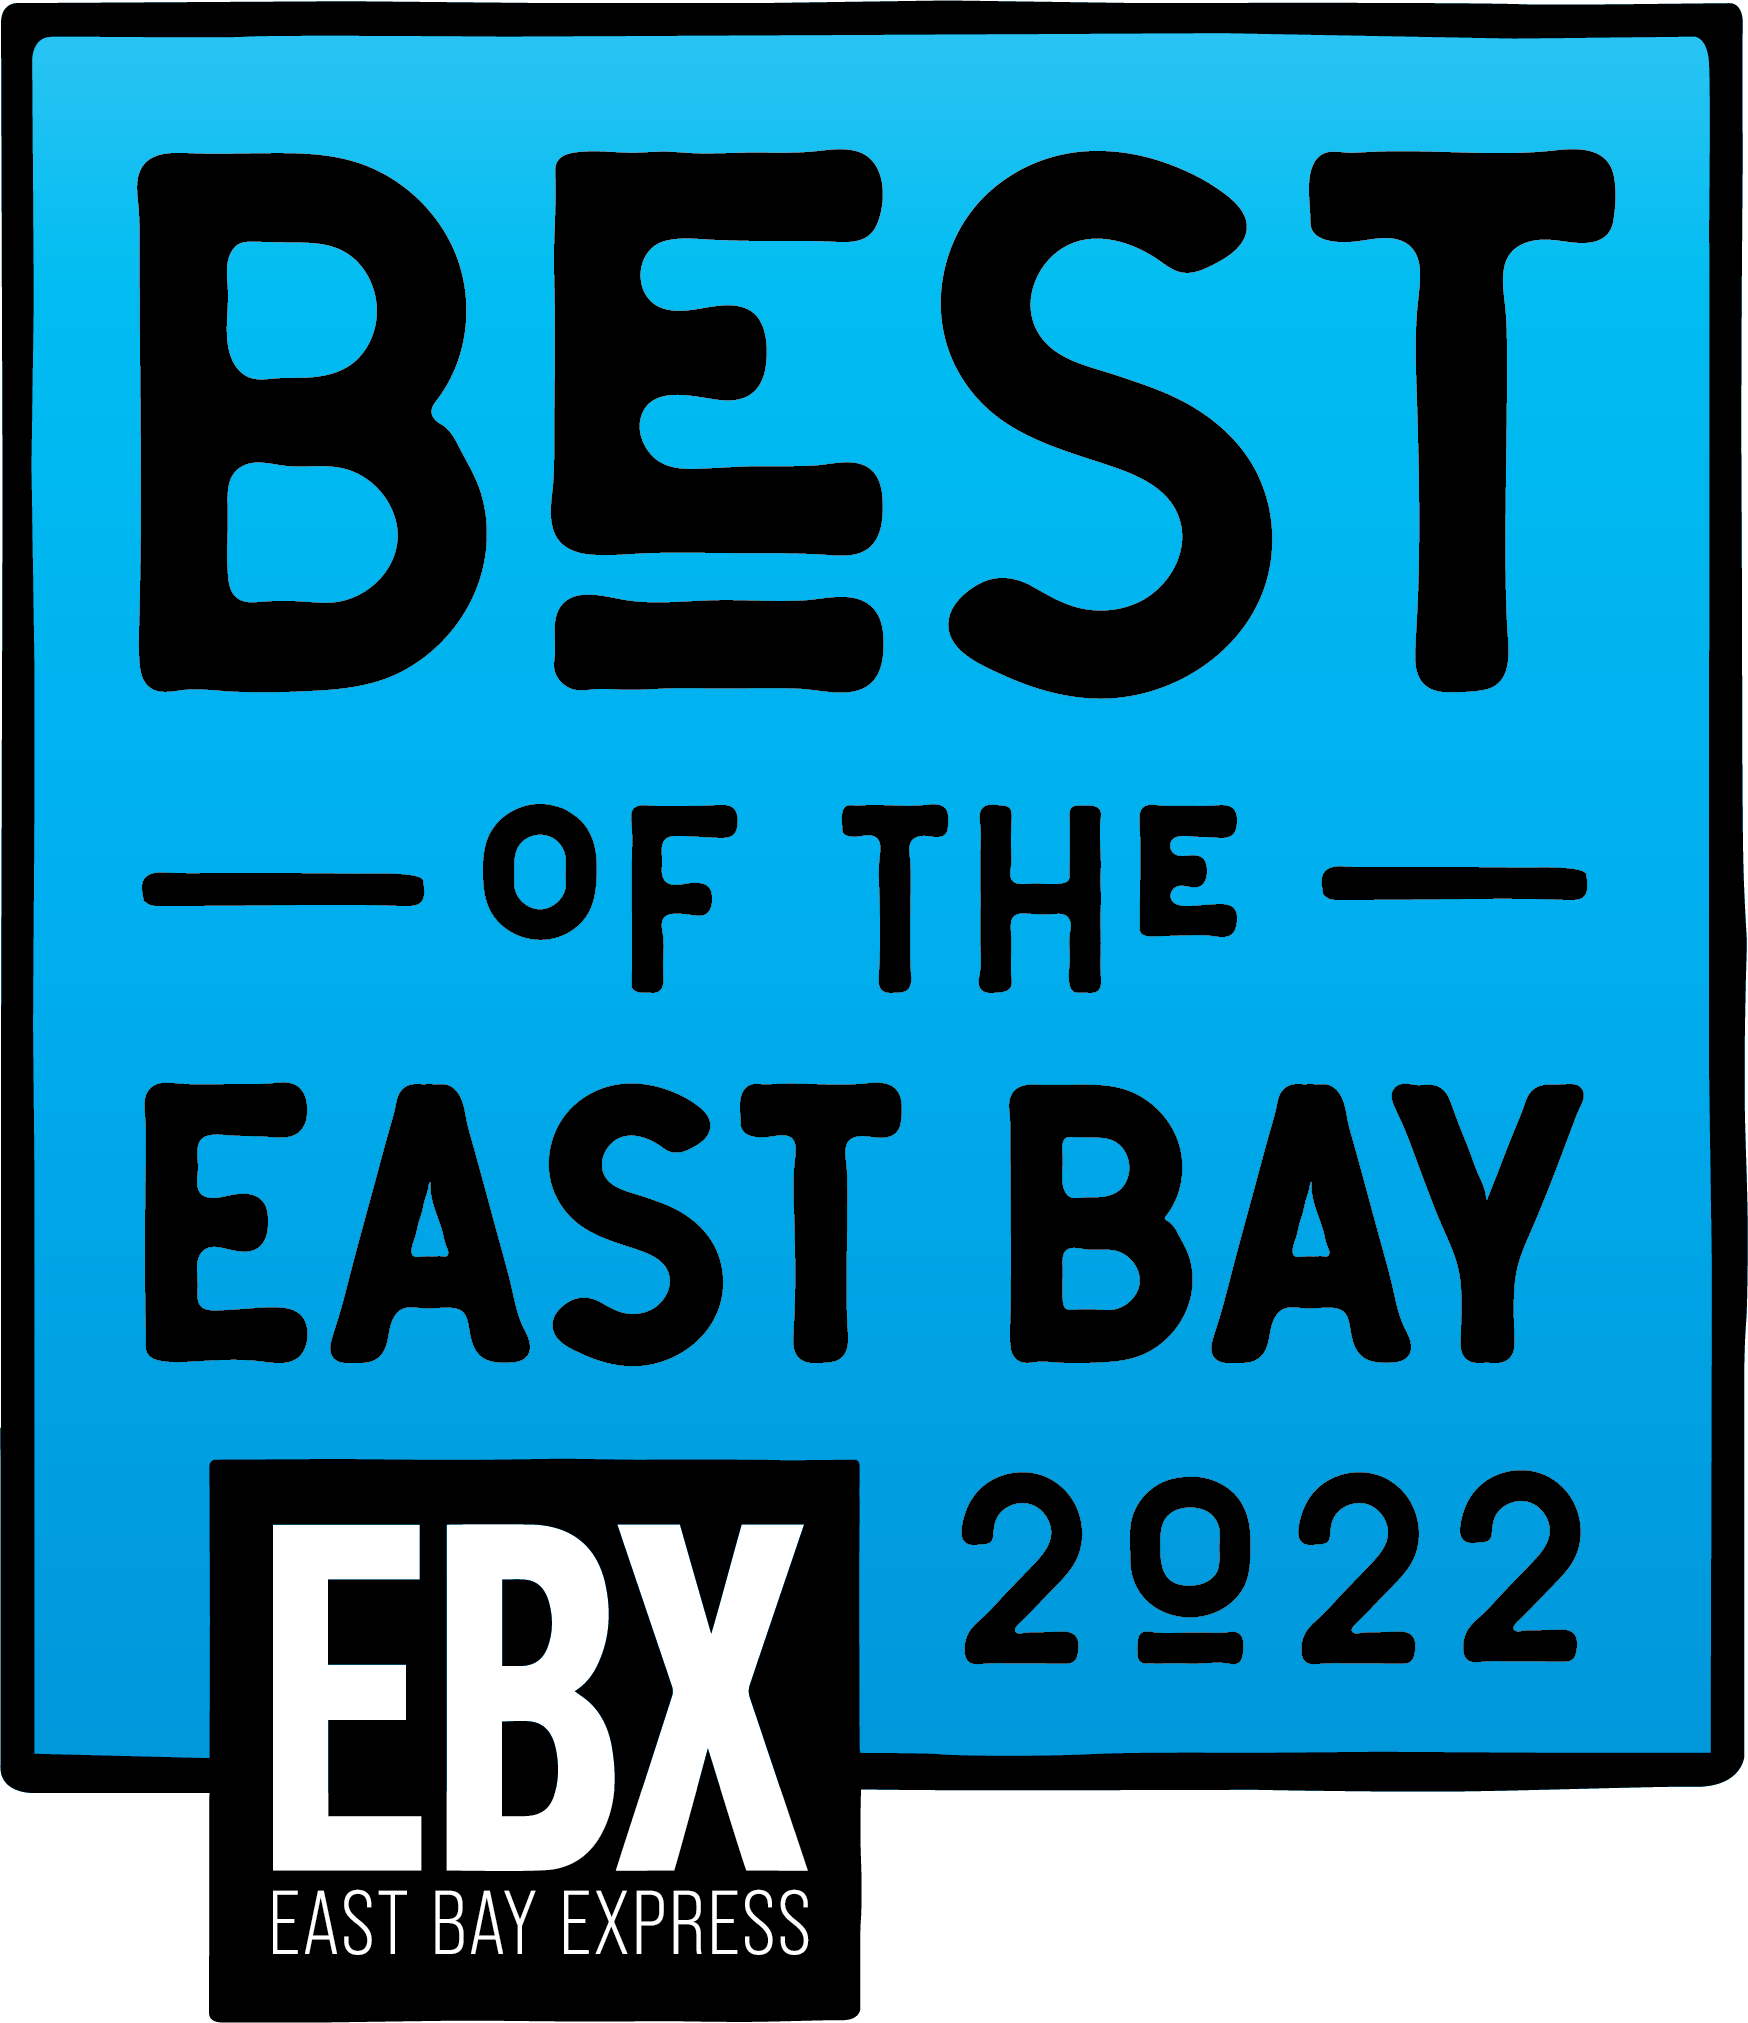 EBX East Bay Express - Winner Best Place to Board Pets - Best of the East Bay 2022